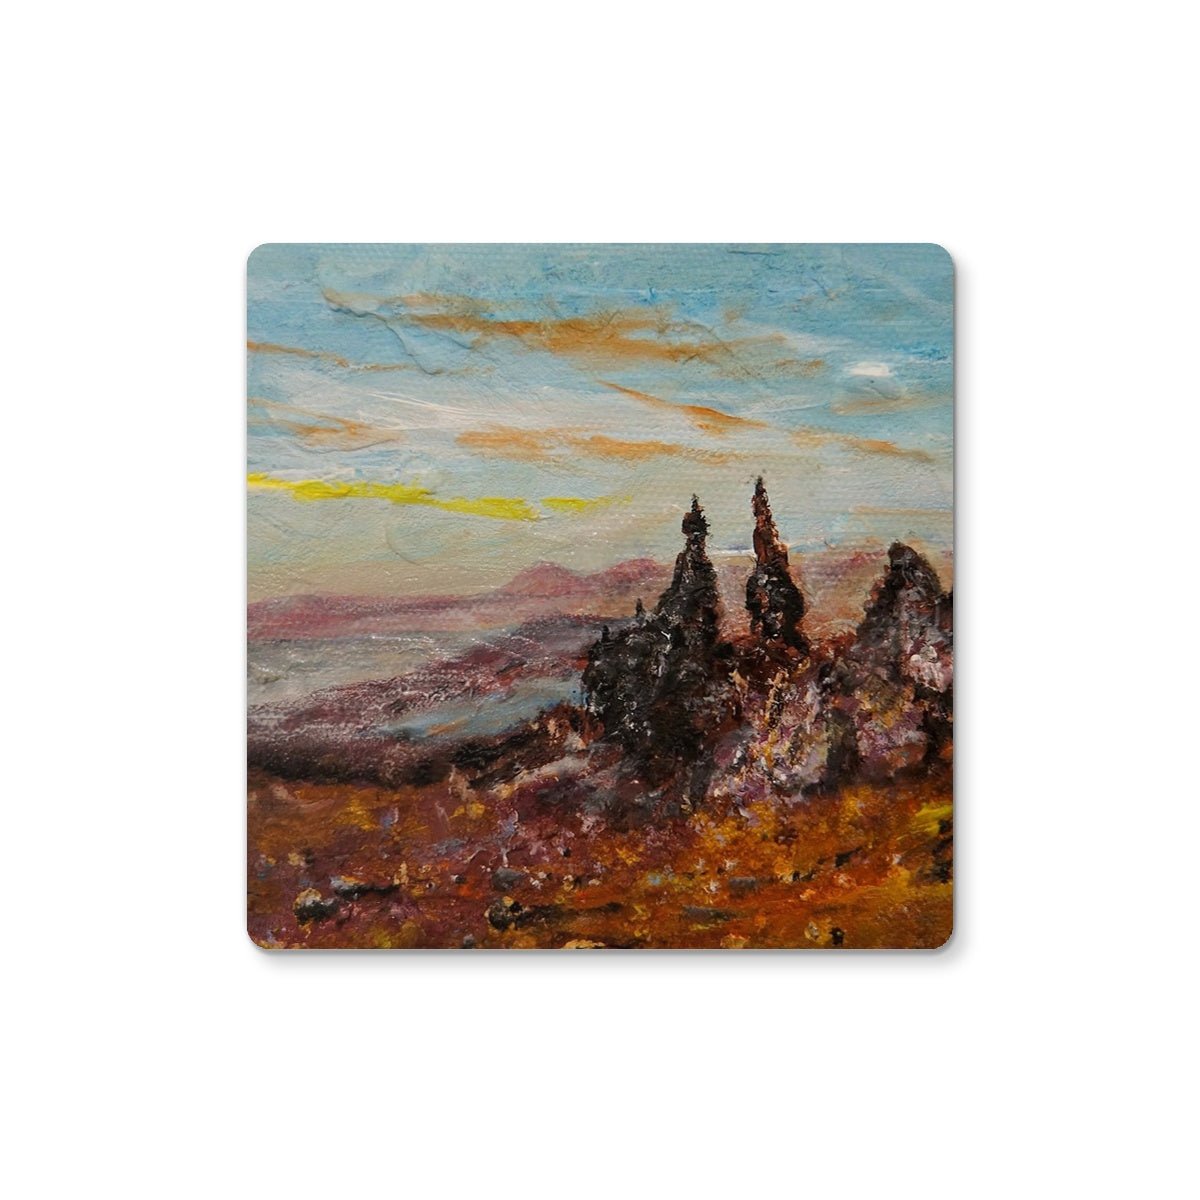 The Old Man Of Storr Skye Art Gifts Coaster-Coasters-Skye Art Gallery-2 Coasters-Paintings, Prints, Homeware, Art Gifts From Scotland By Scottish Artist Kevin Hunter